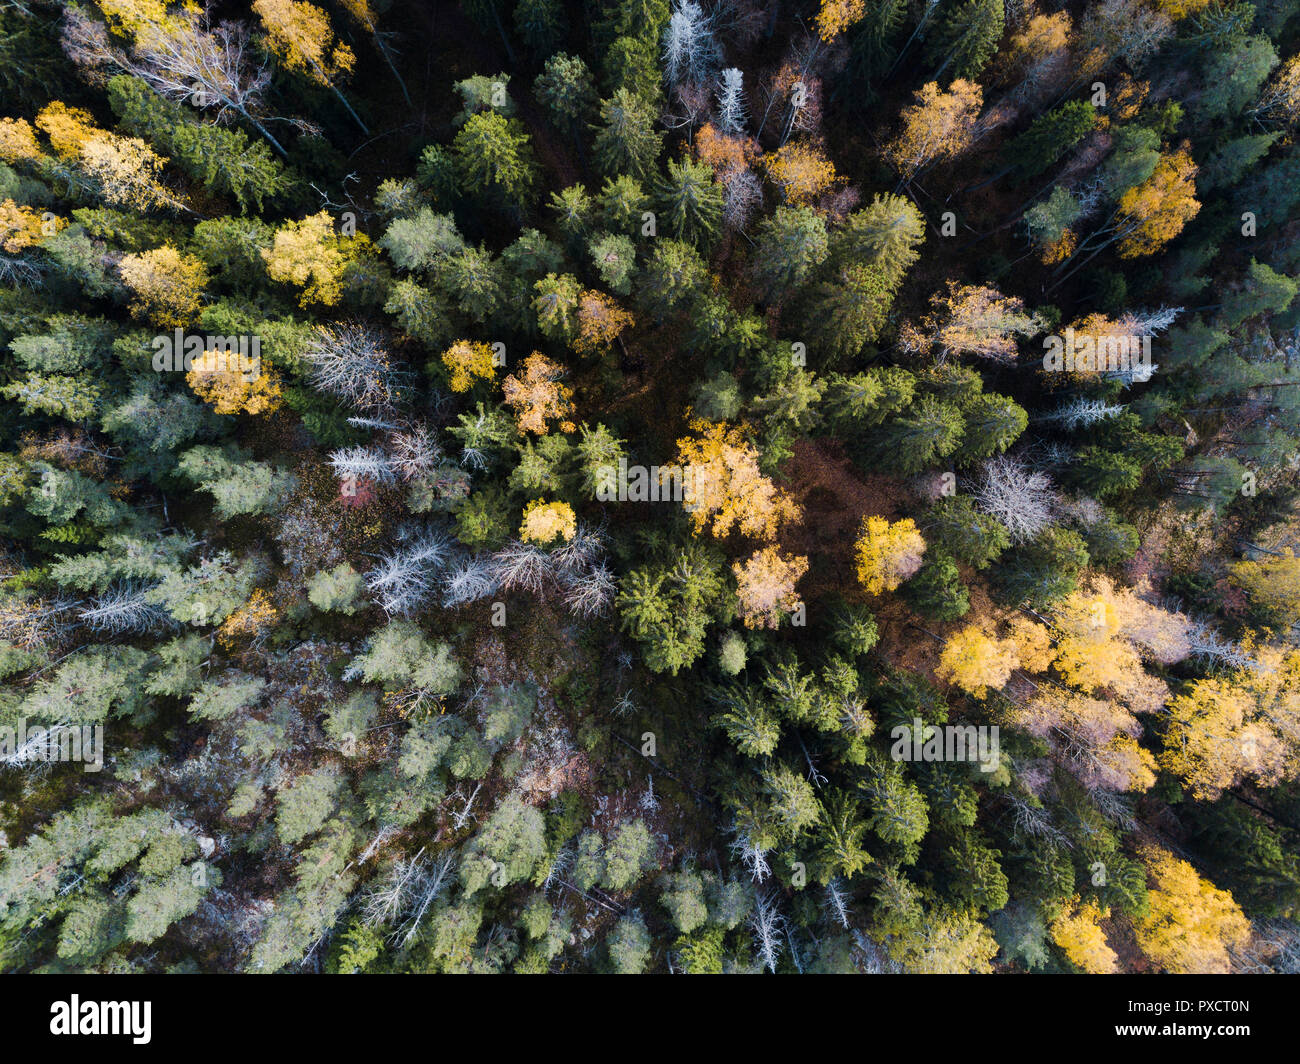 Finnish Forrest from above Stock Photo